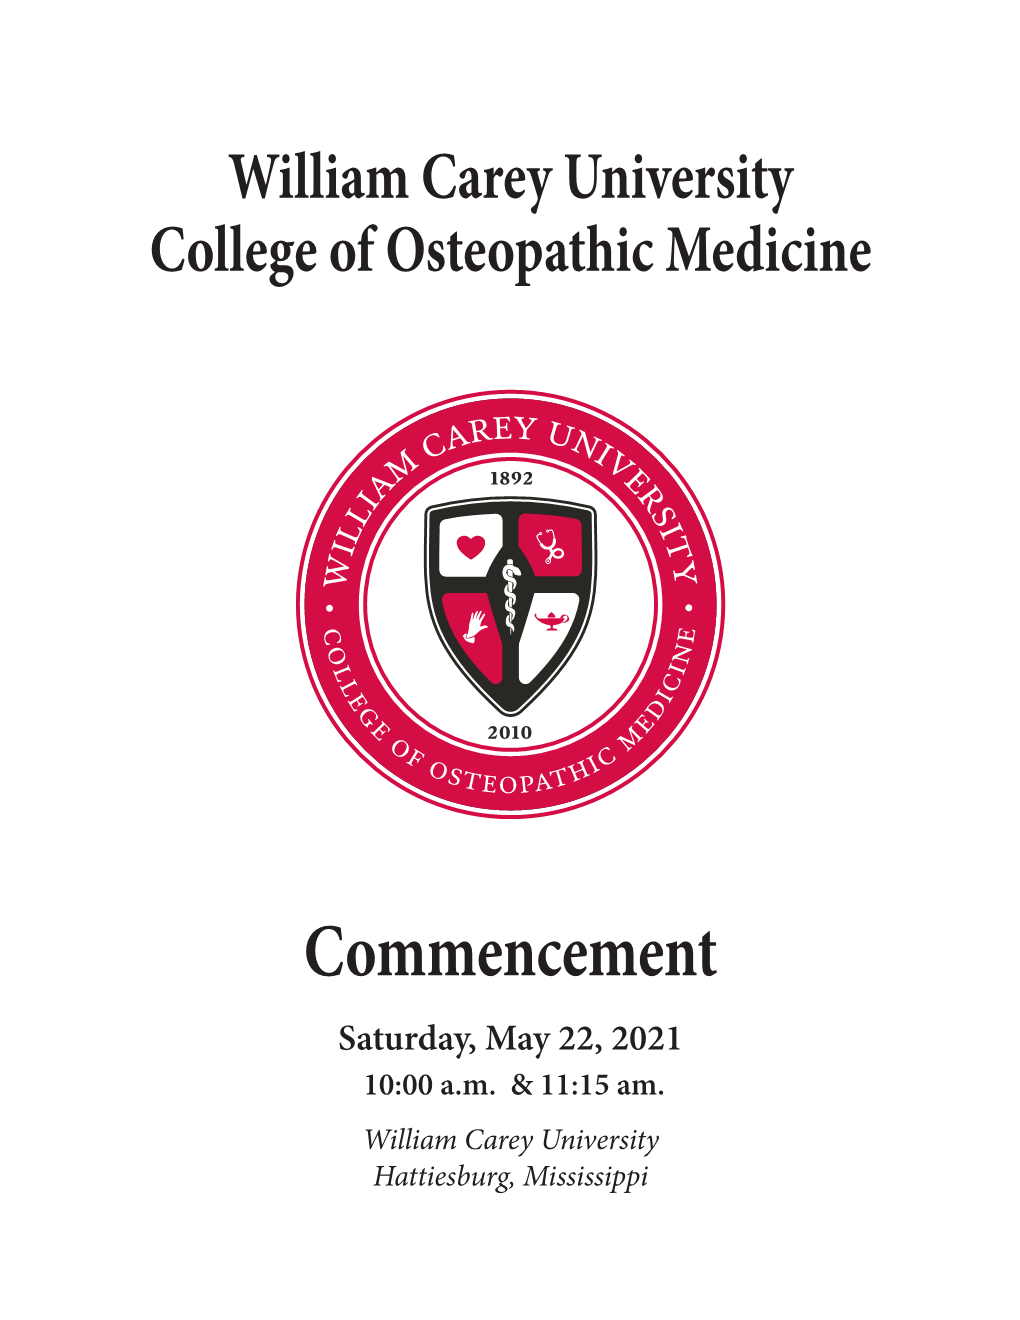 To Download a Copy of the College of Osteopathic Medicine Program